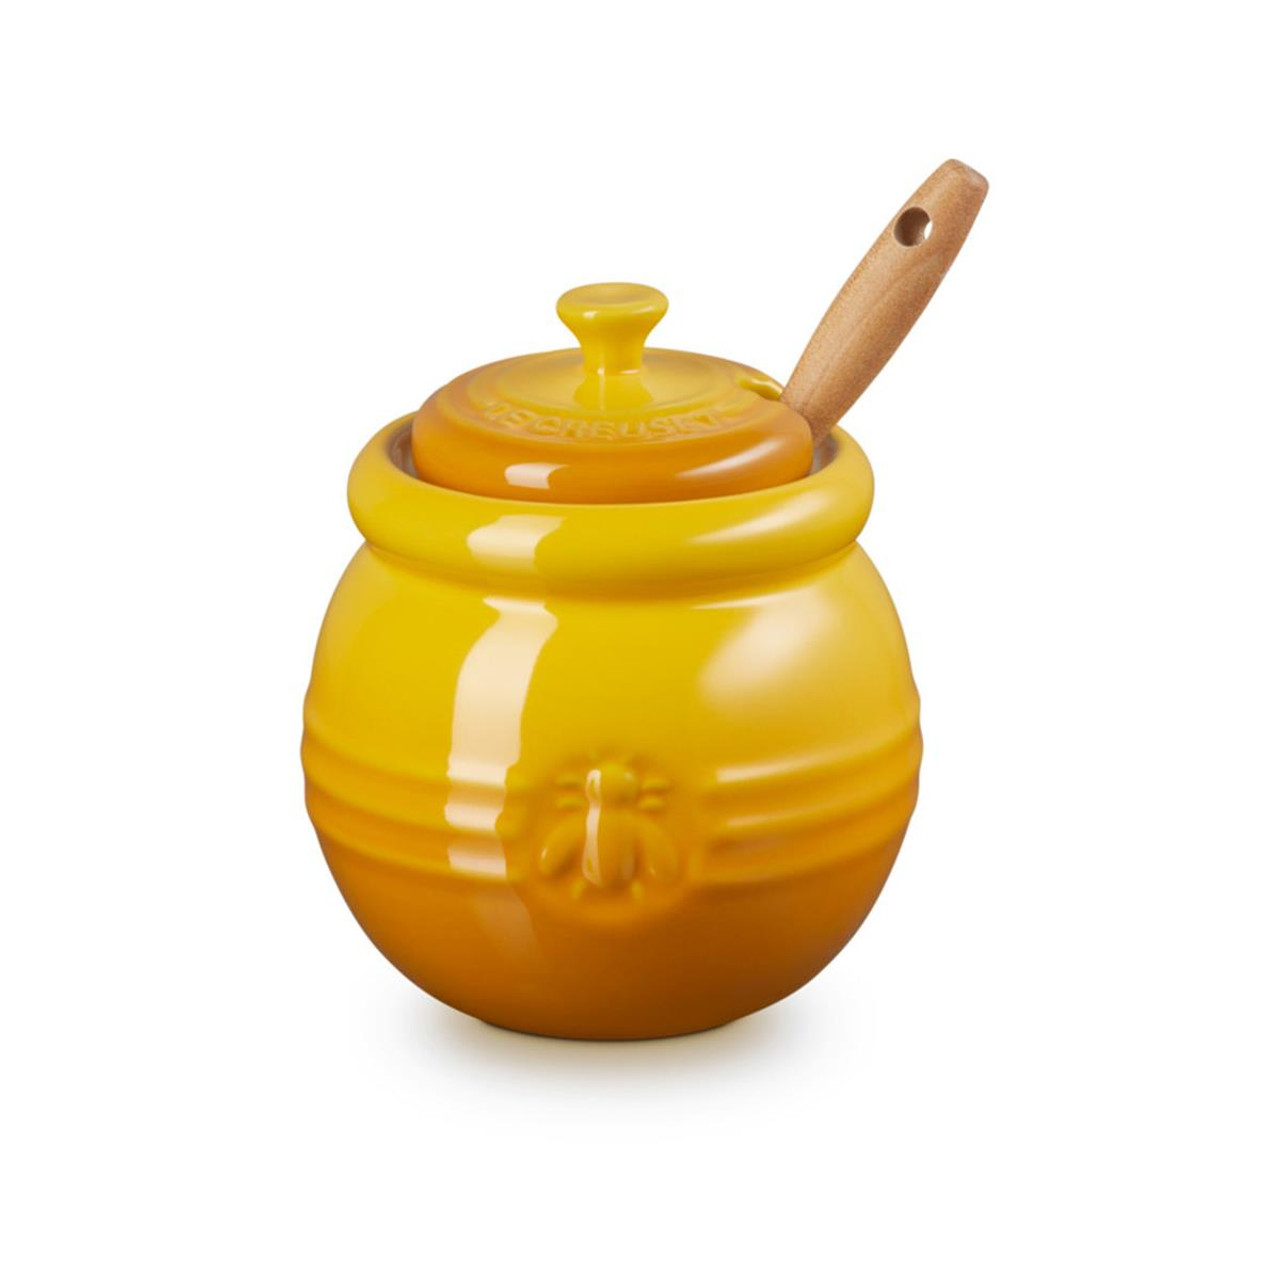 What are the characteristics of the le creuset honey pot with dipper?